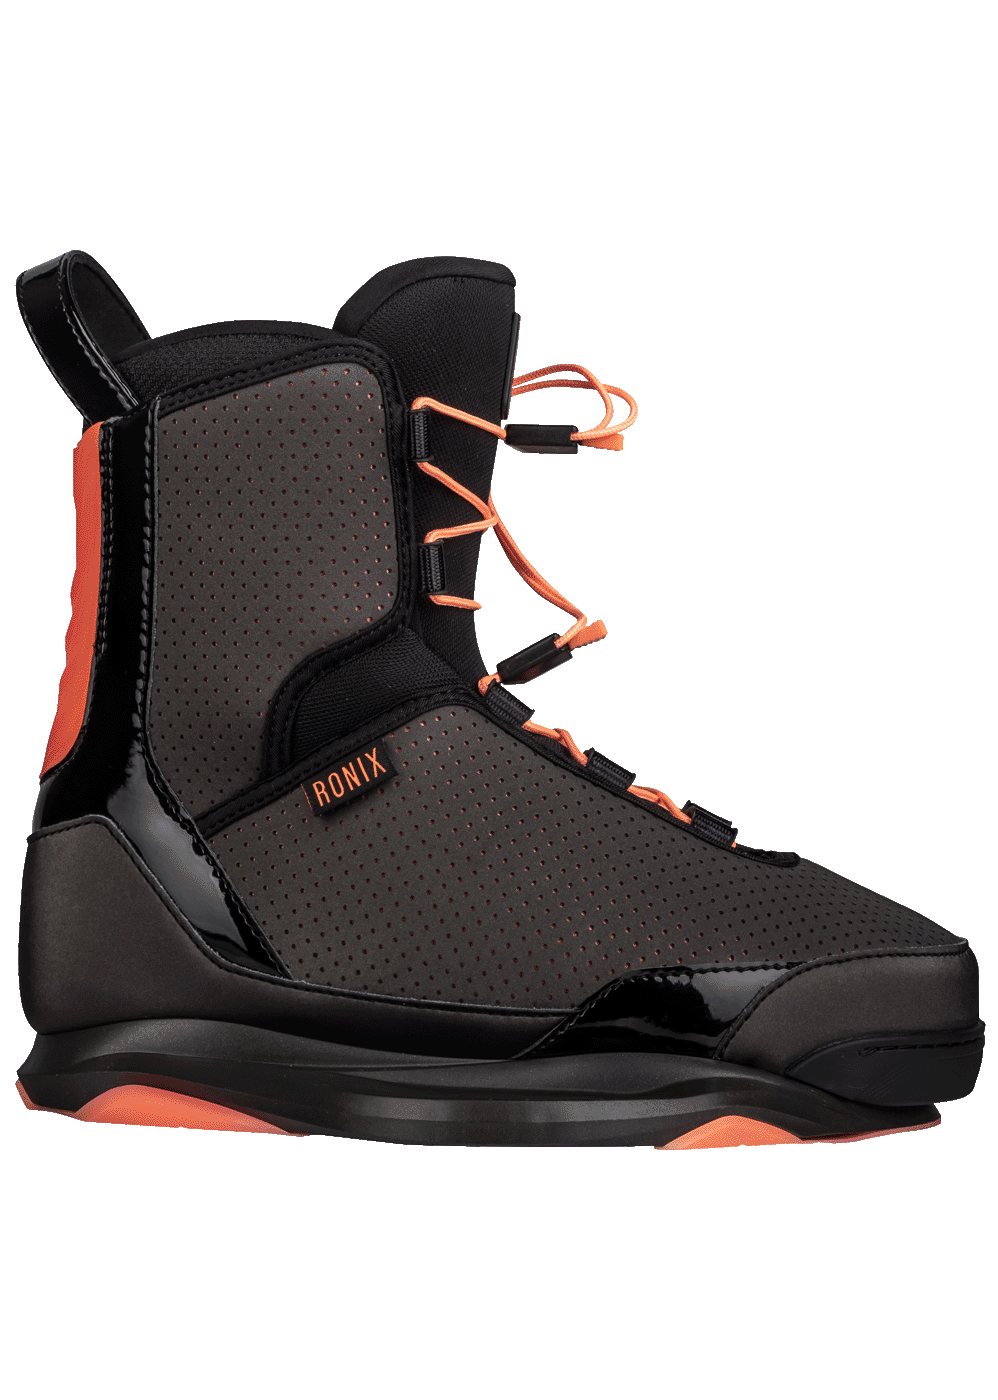 Rise Wakeboard Boot - Intuition | 2022